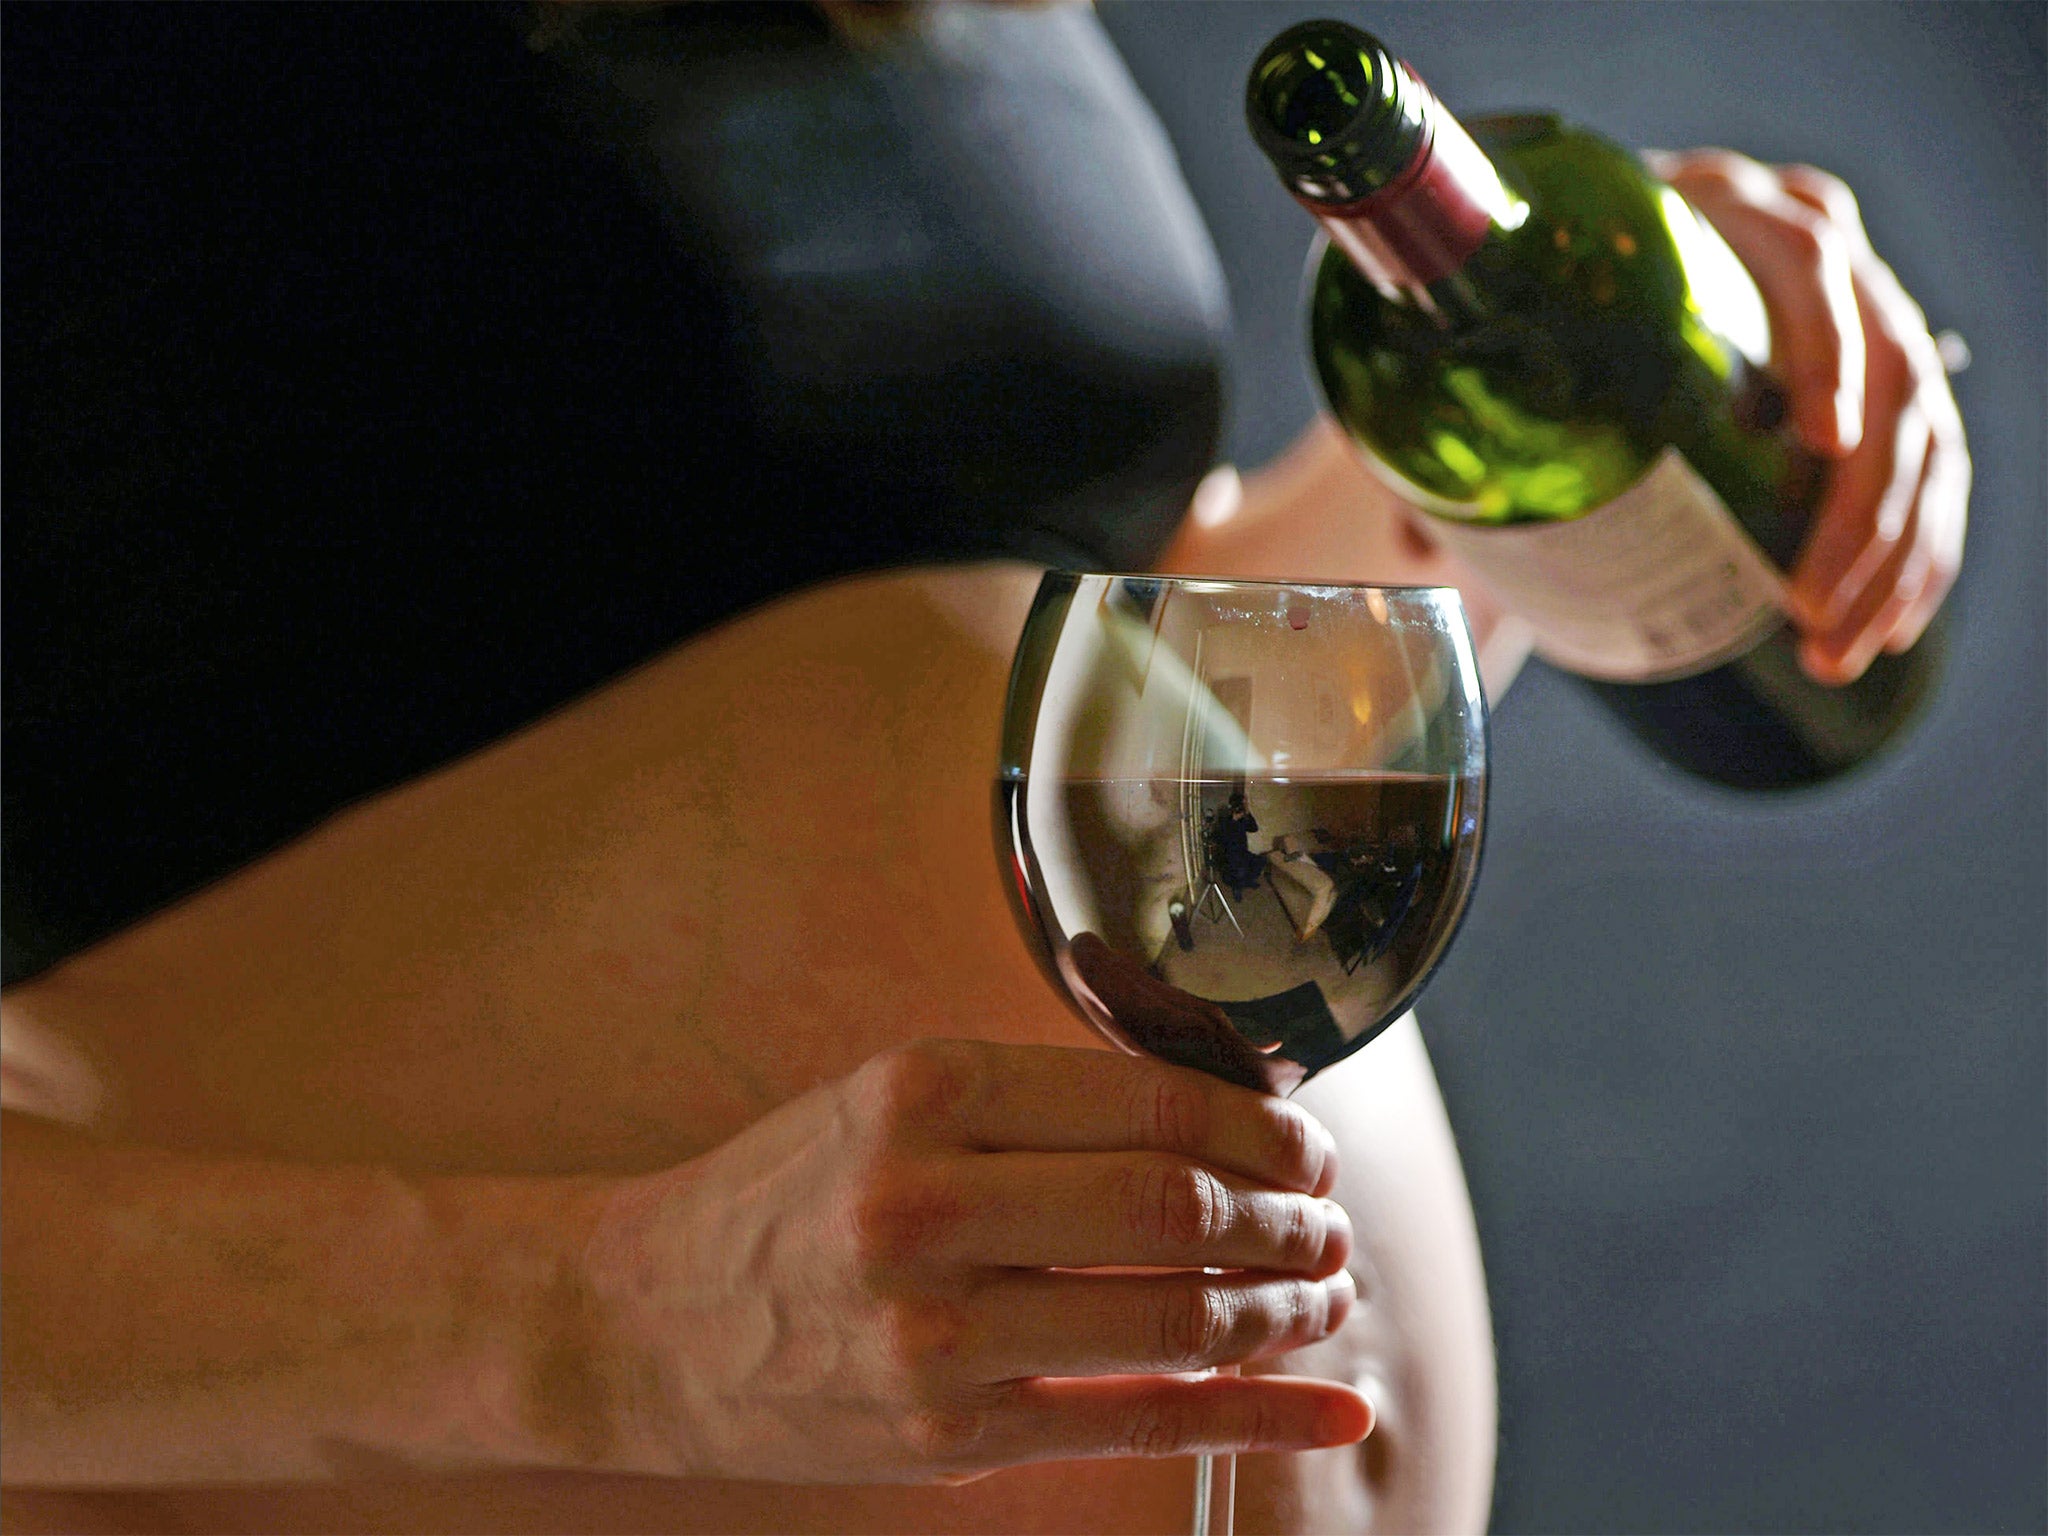 The "only ethical advice that can be given is complete abstinence from alcohol in pregnancy," the experts said